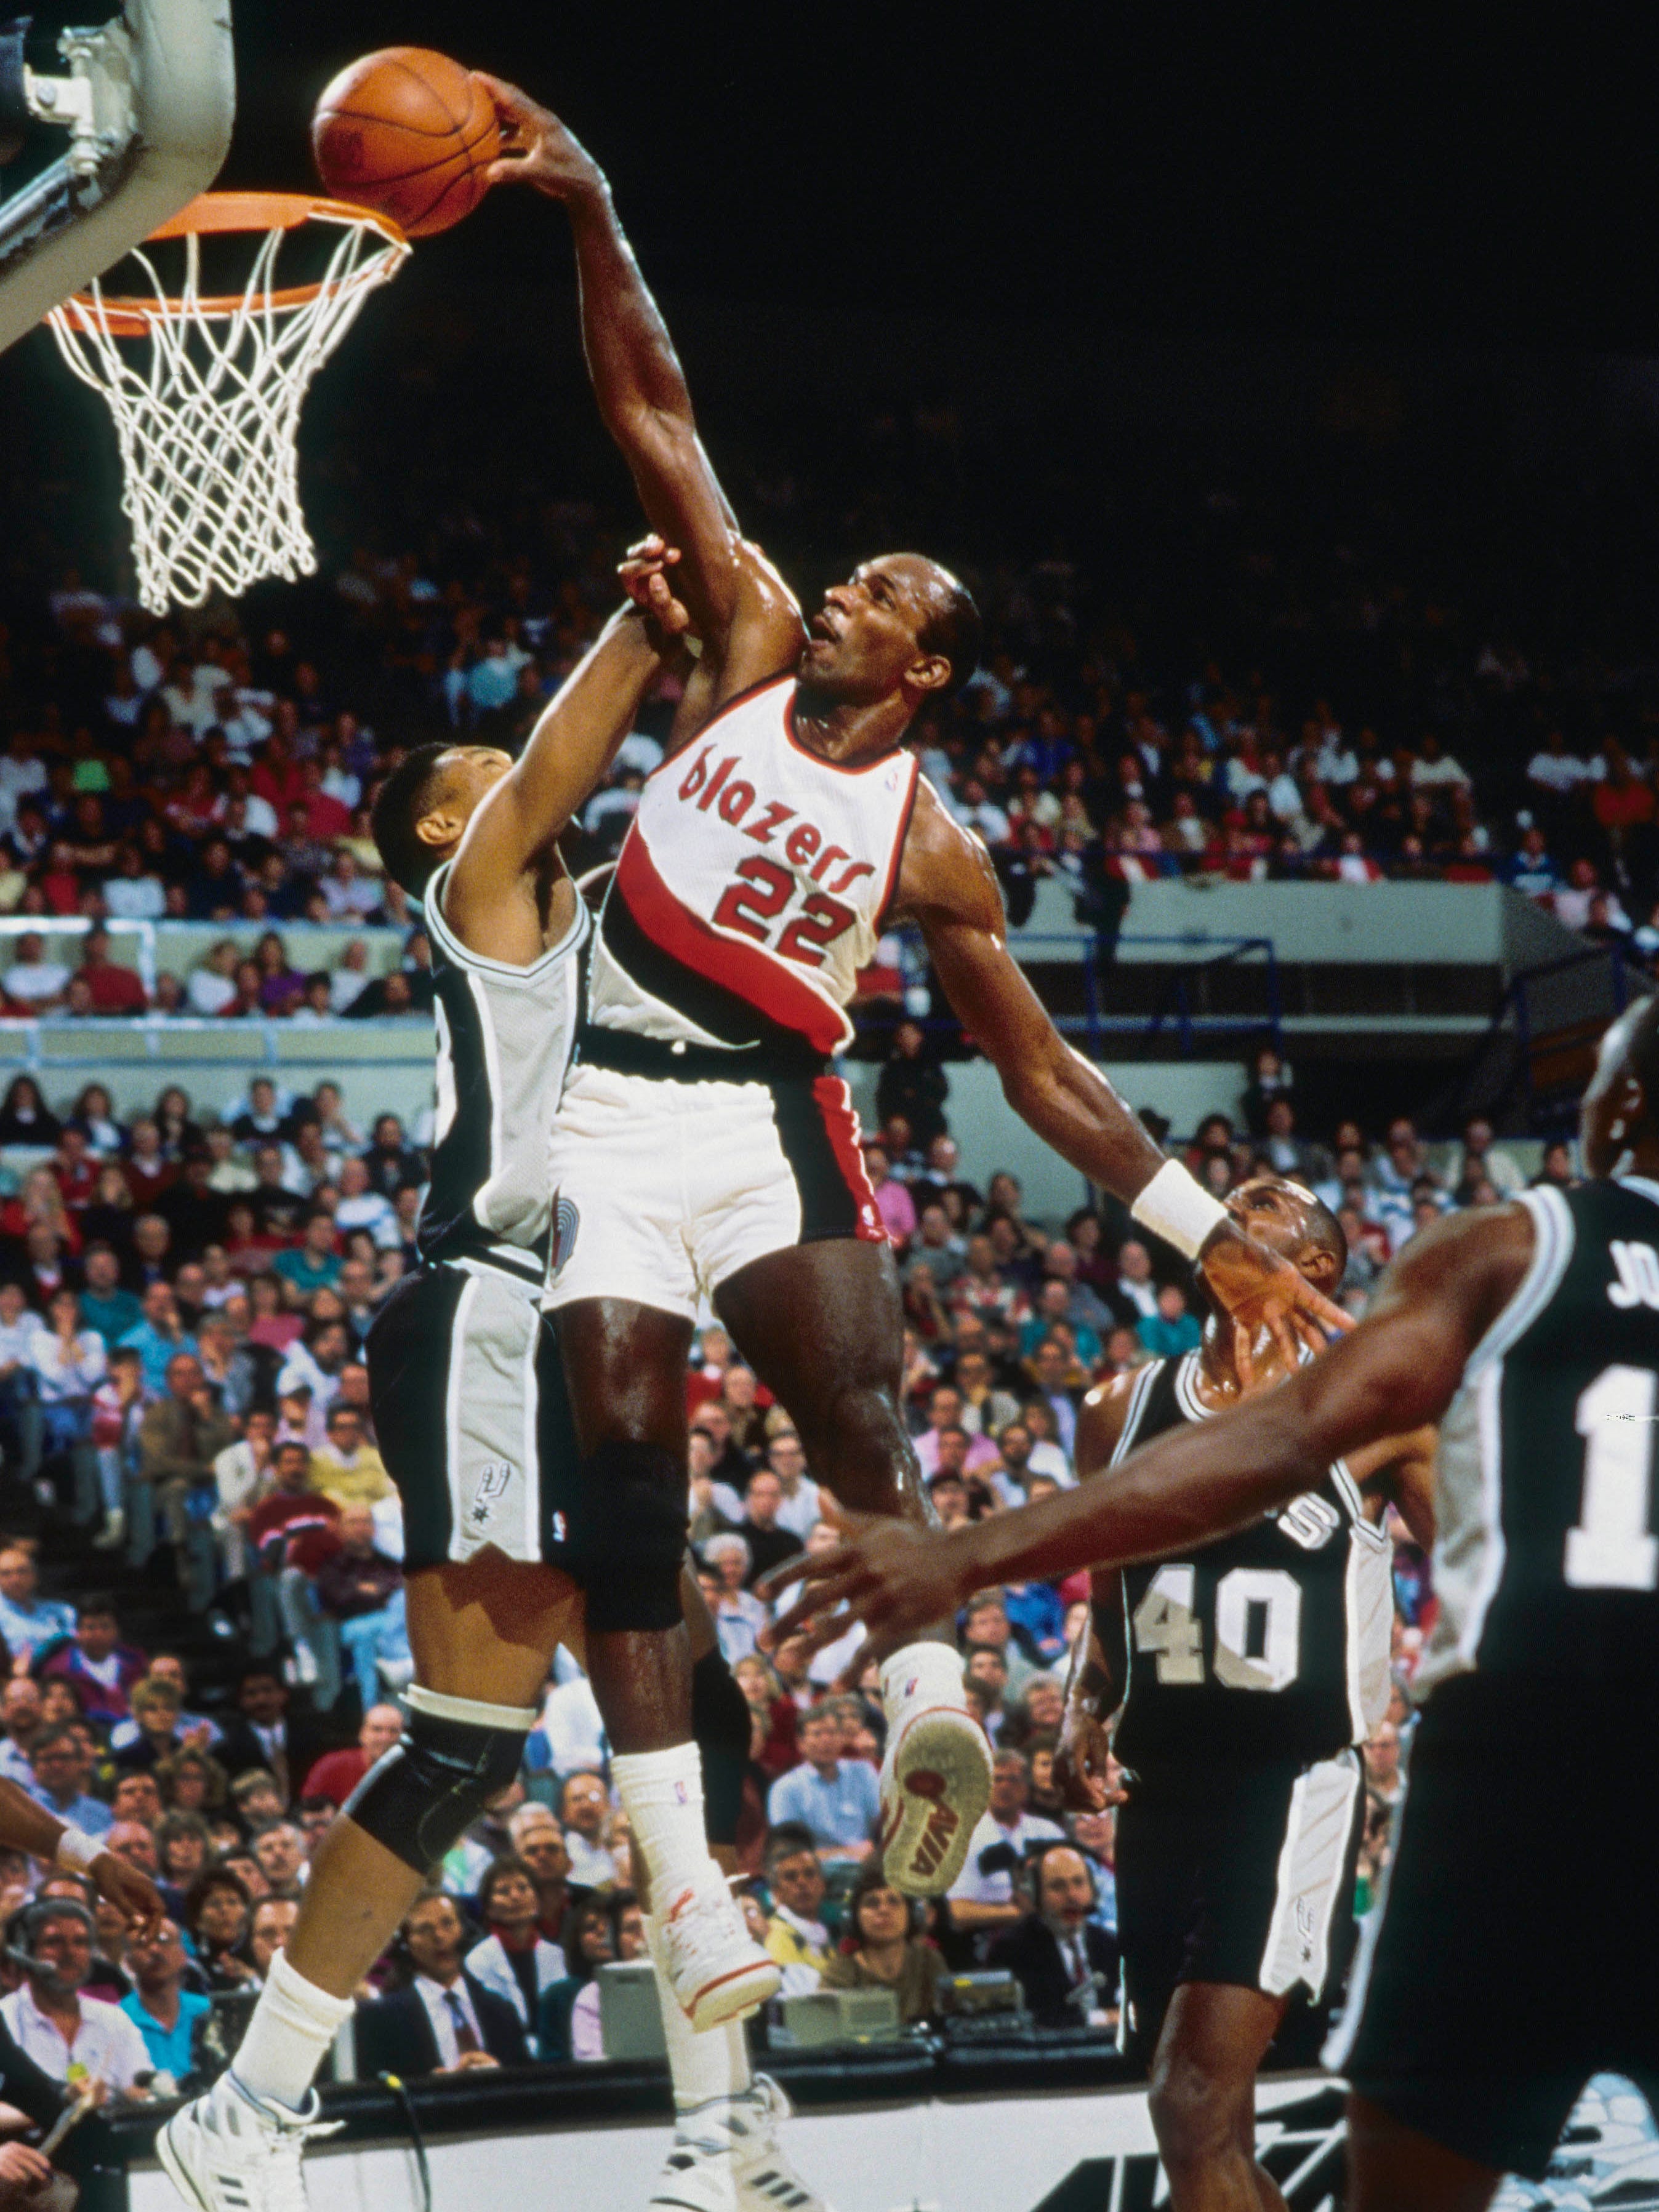 In 1996, after wearing Avia for six seasons, Clyde Drexler made